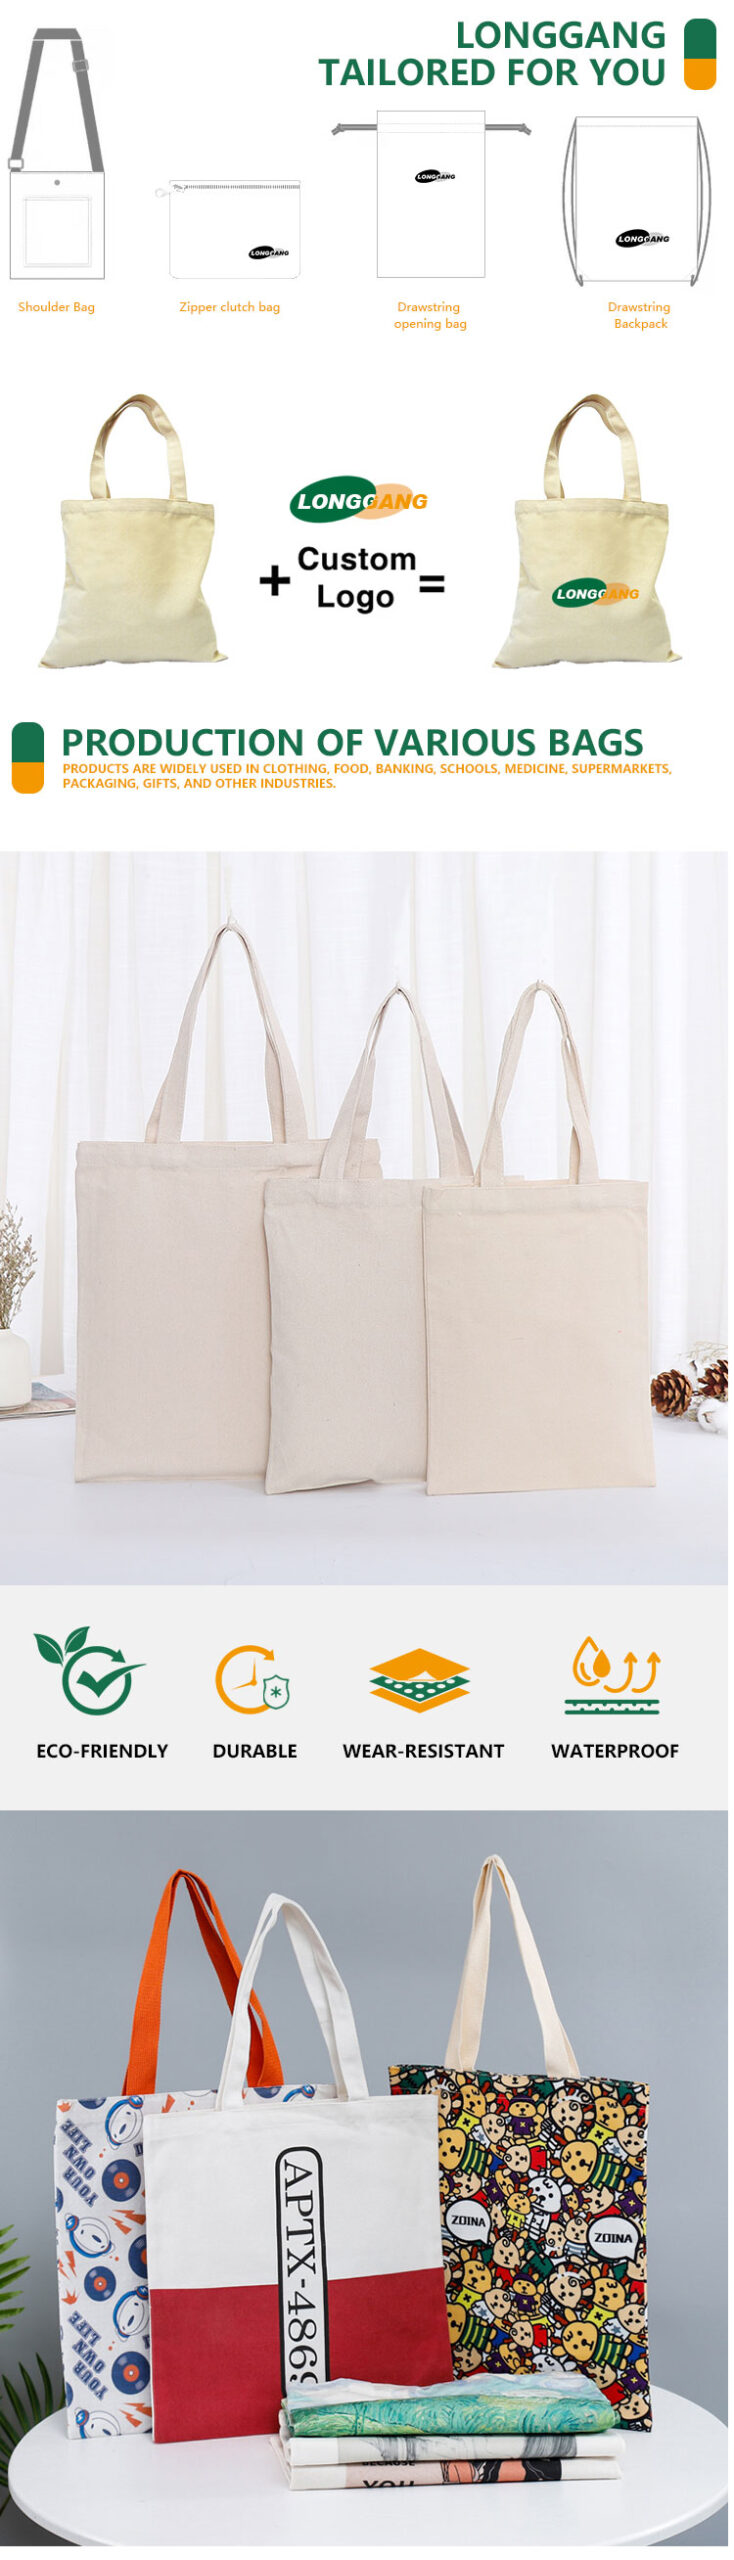 shopping bags printed with logo